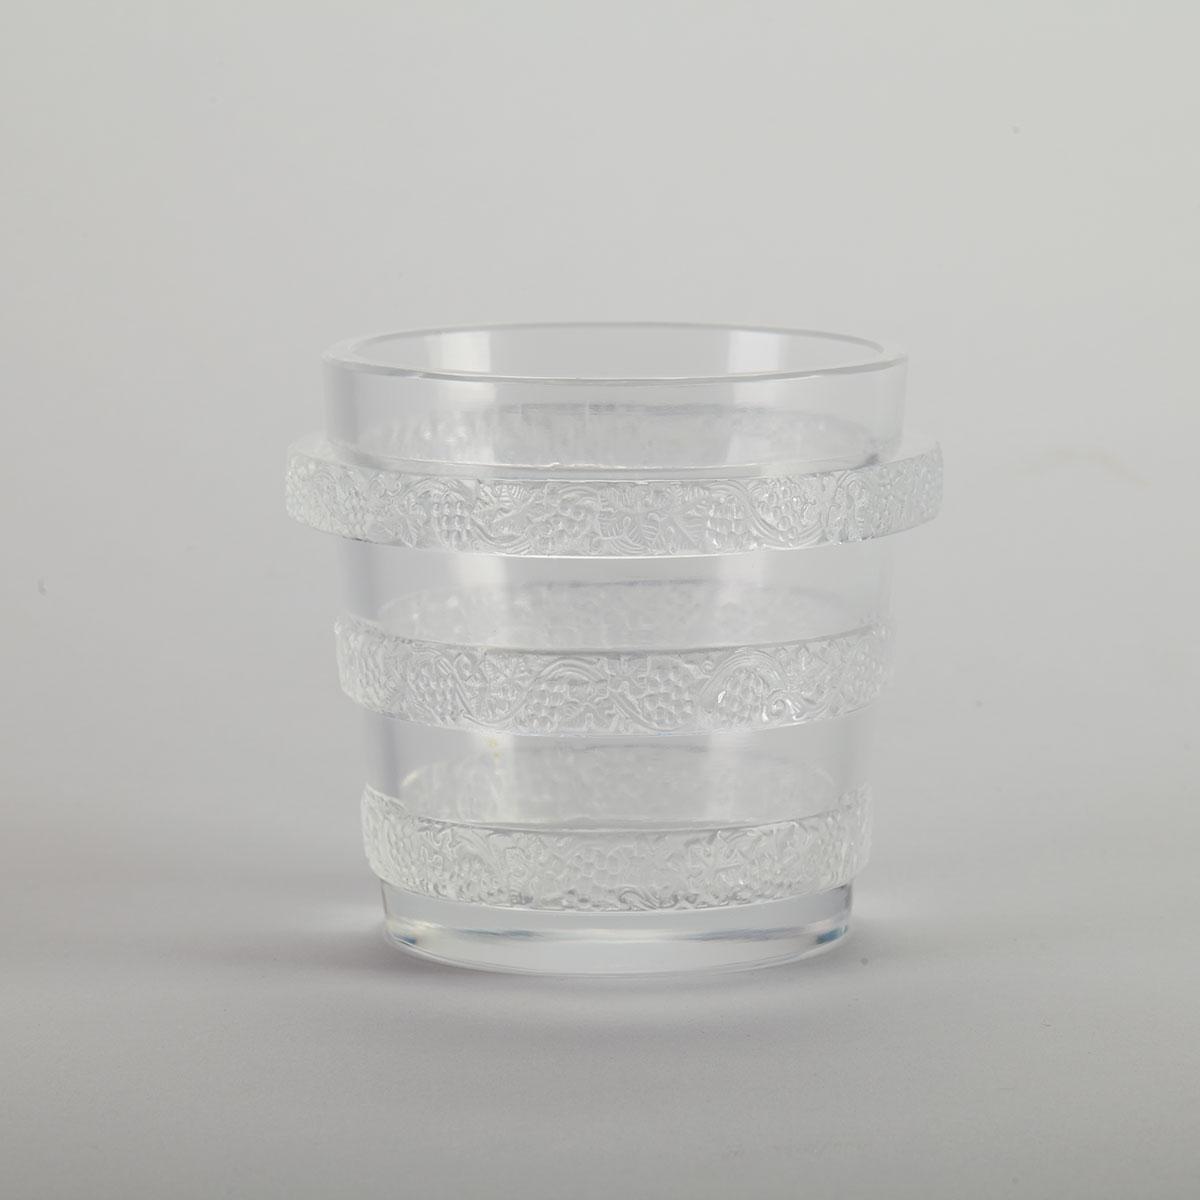 ‘Ricquewihr’, Lalique Moulded and Partly Frosted Glass Ice Bucket, post-1945